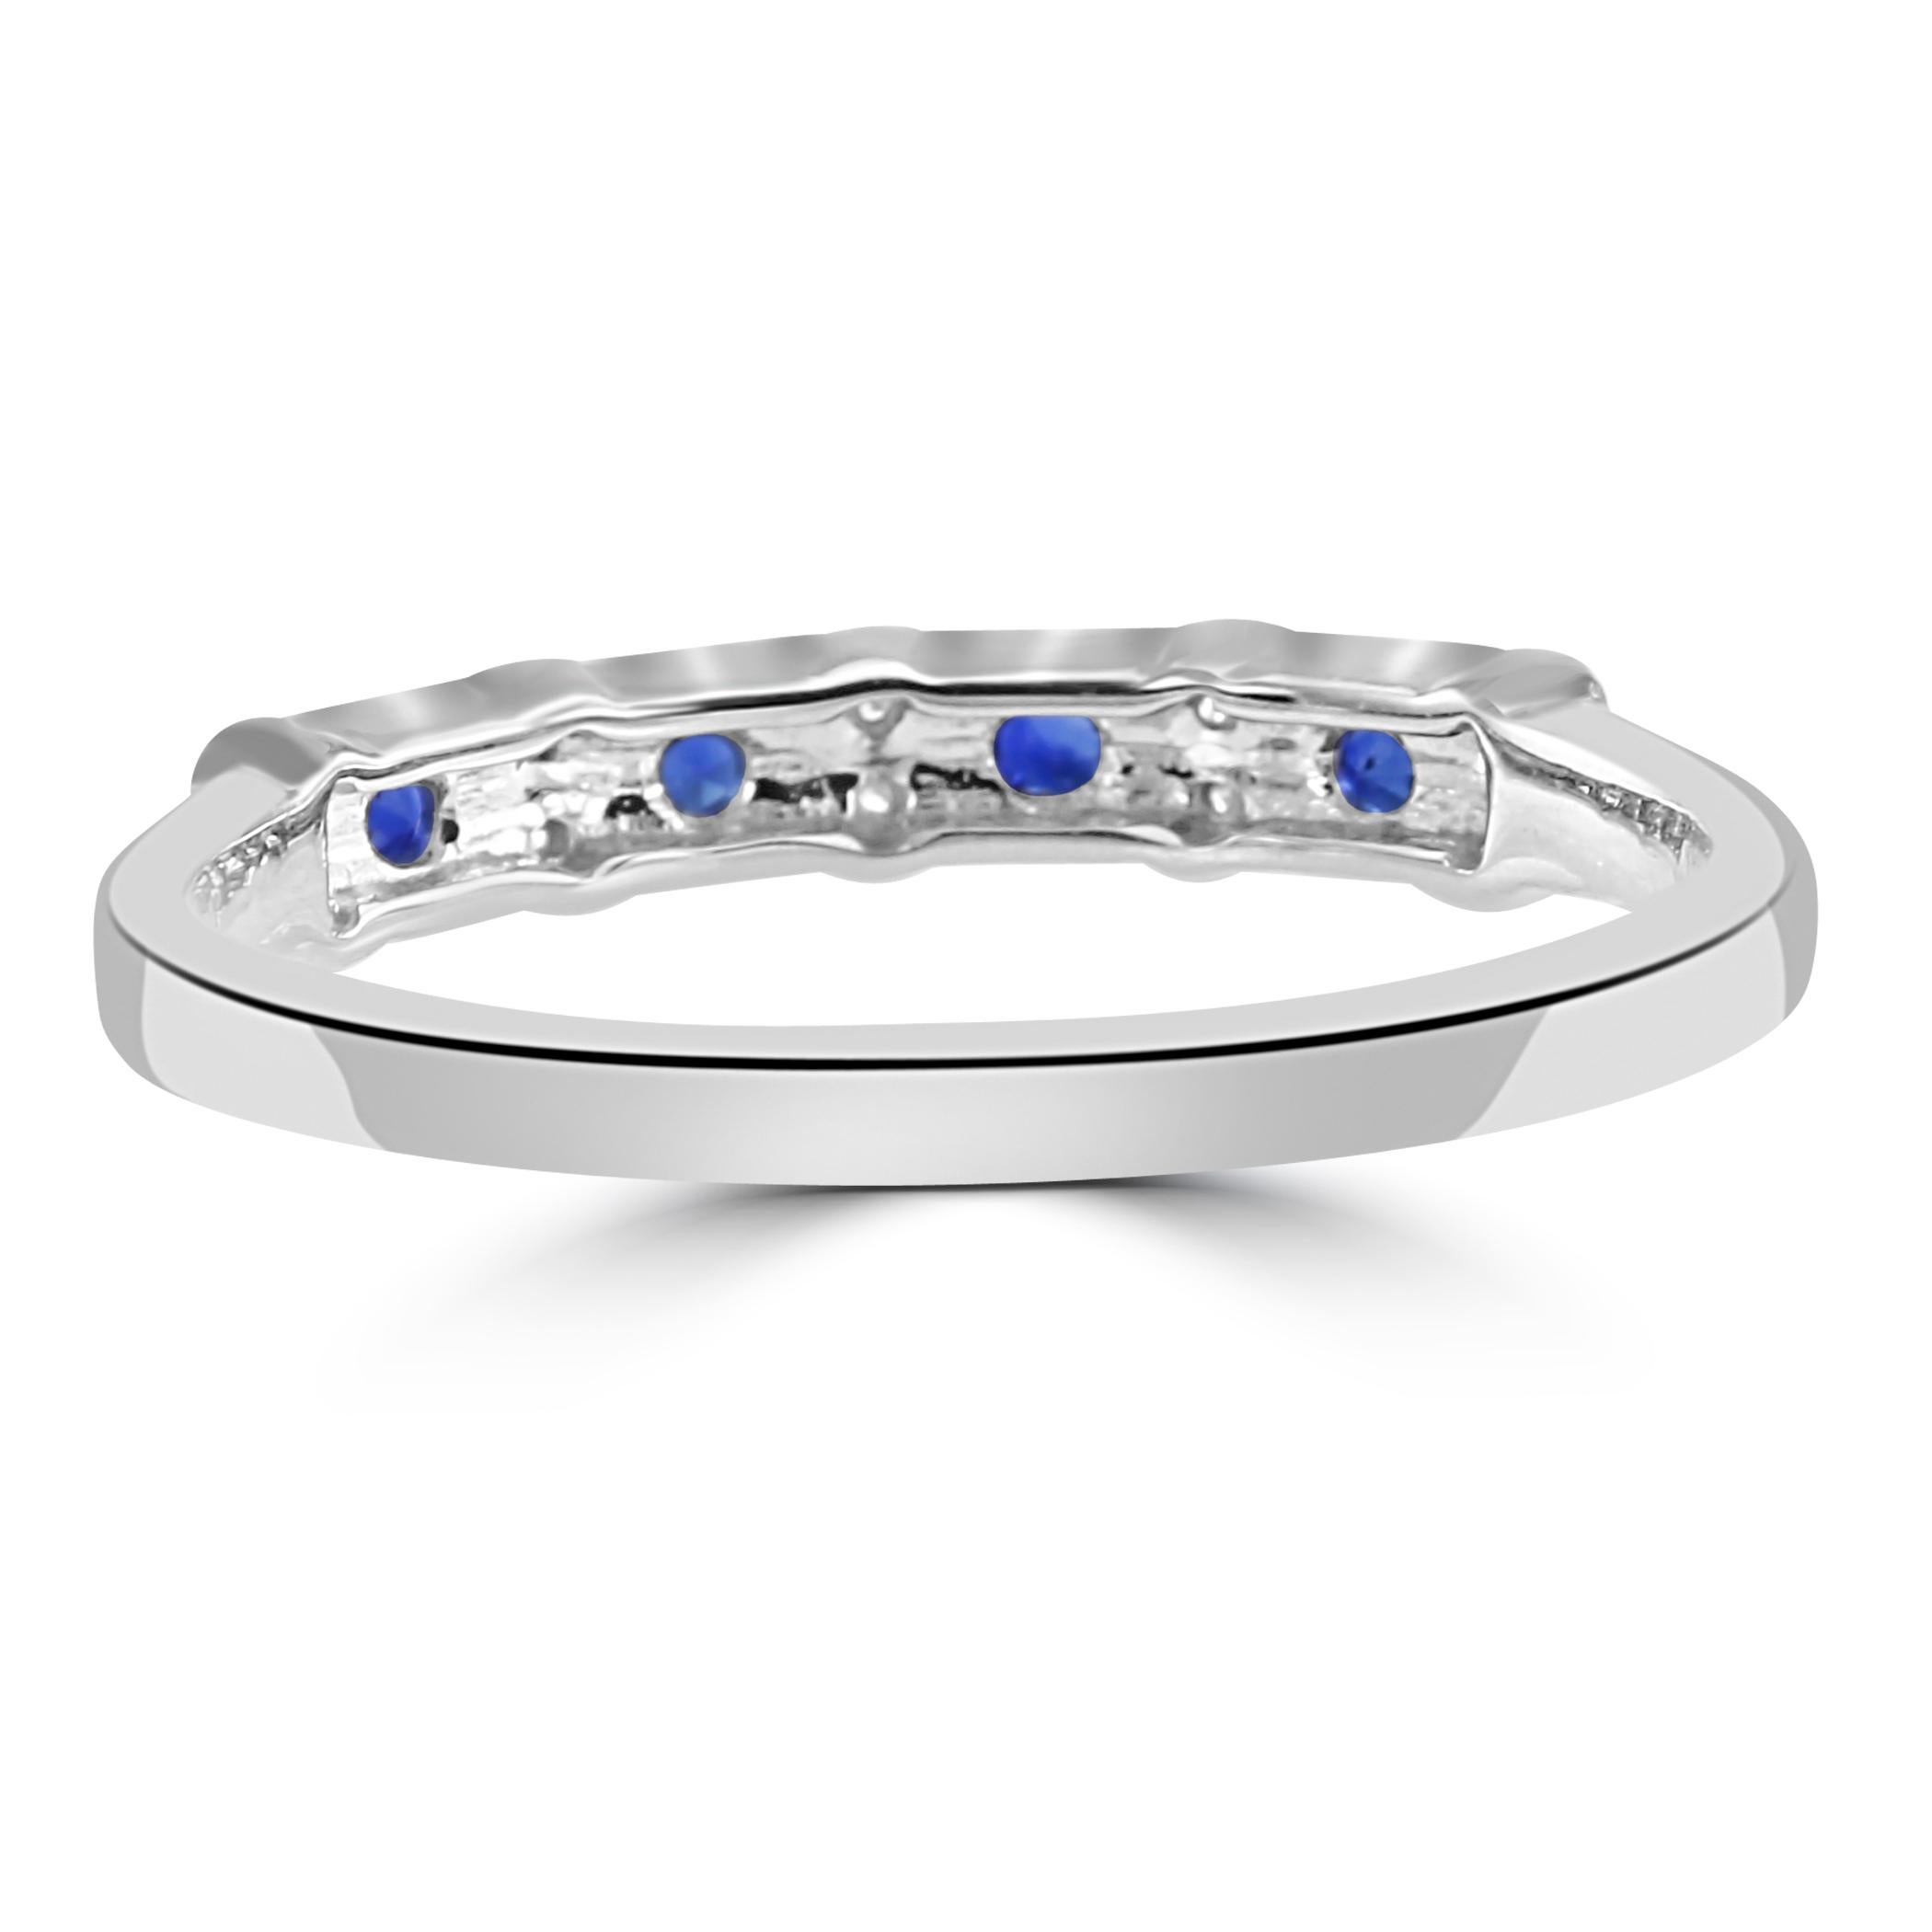 For Sale:  Blue Sapphire White Diamond Round 18K White Gold Fashion Engagement Band Ring 7